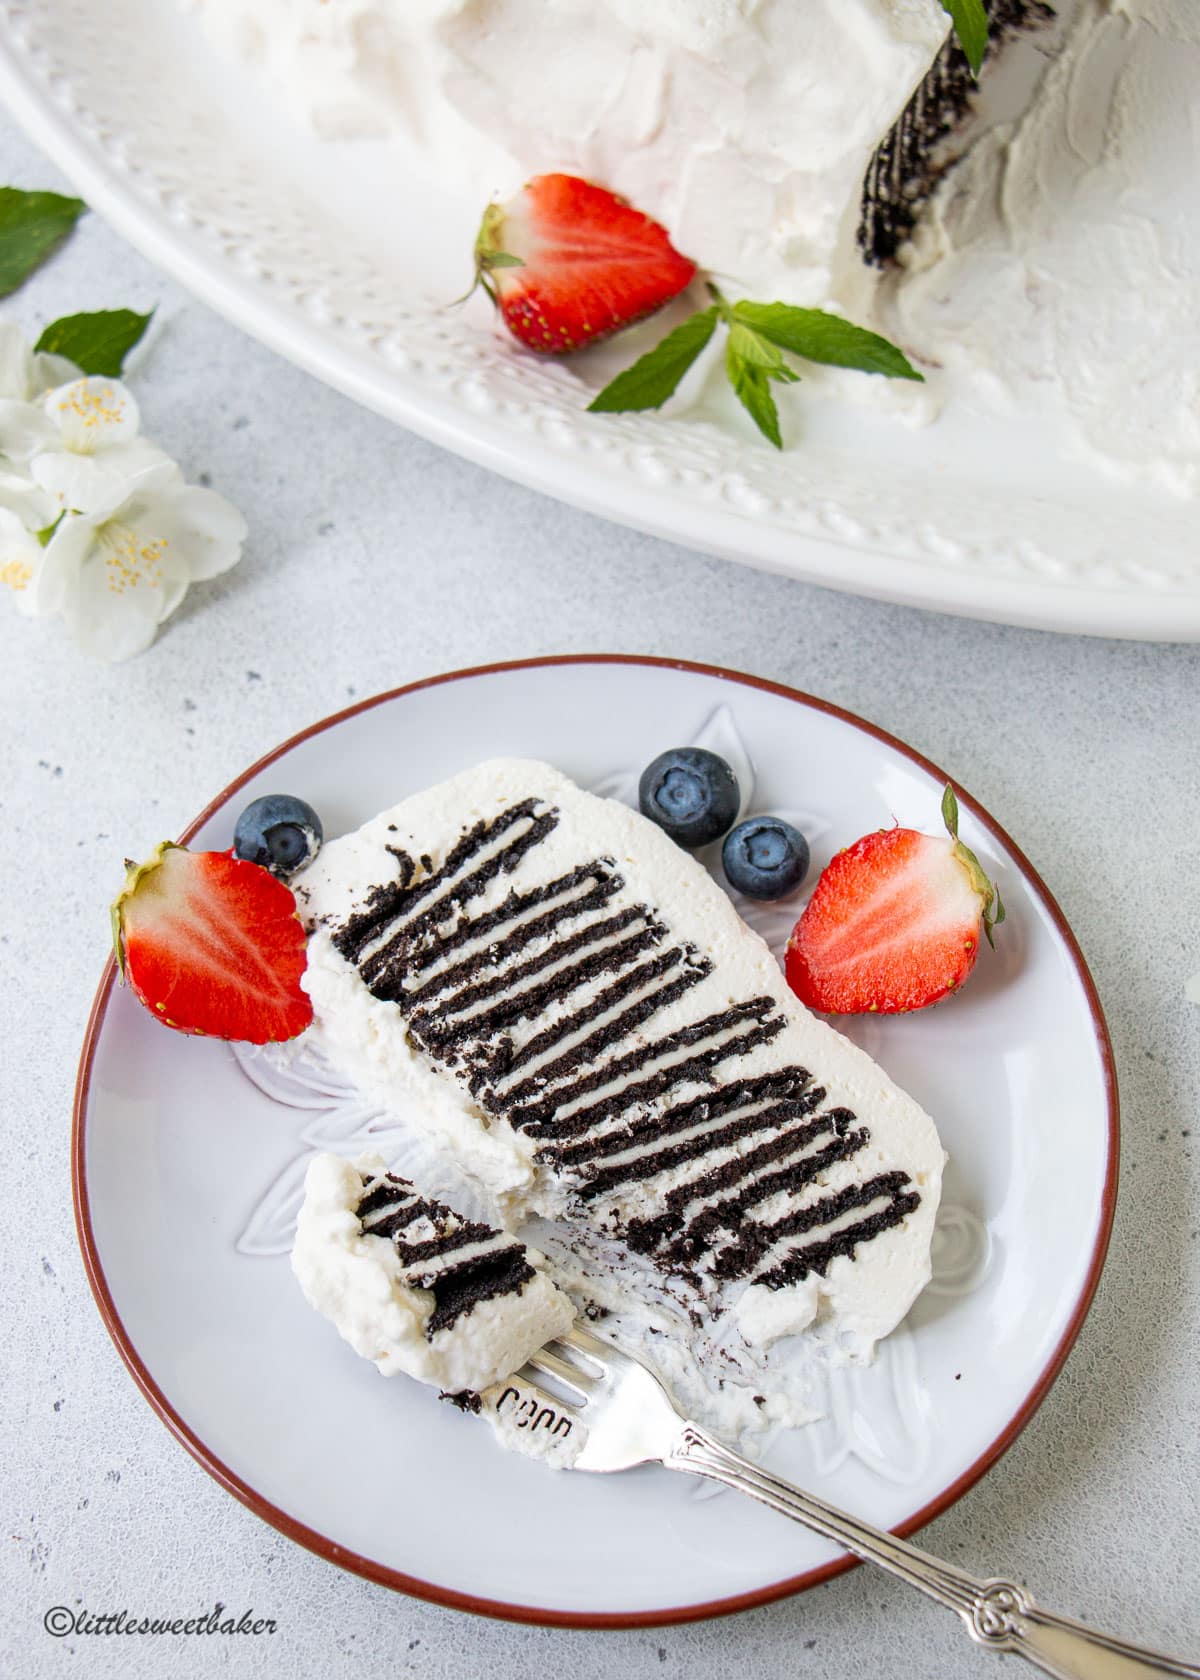 A slice of icebox cake on a plate with strawberries and blueberries.